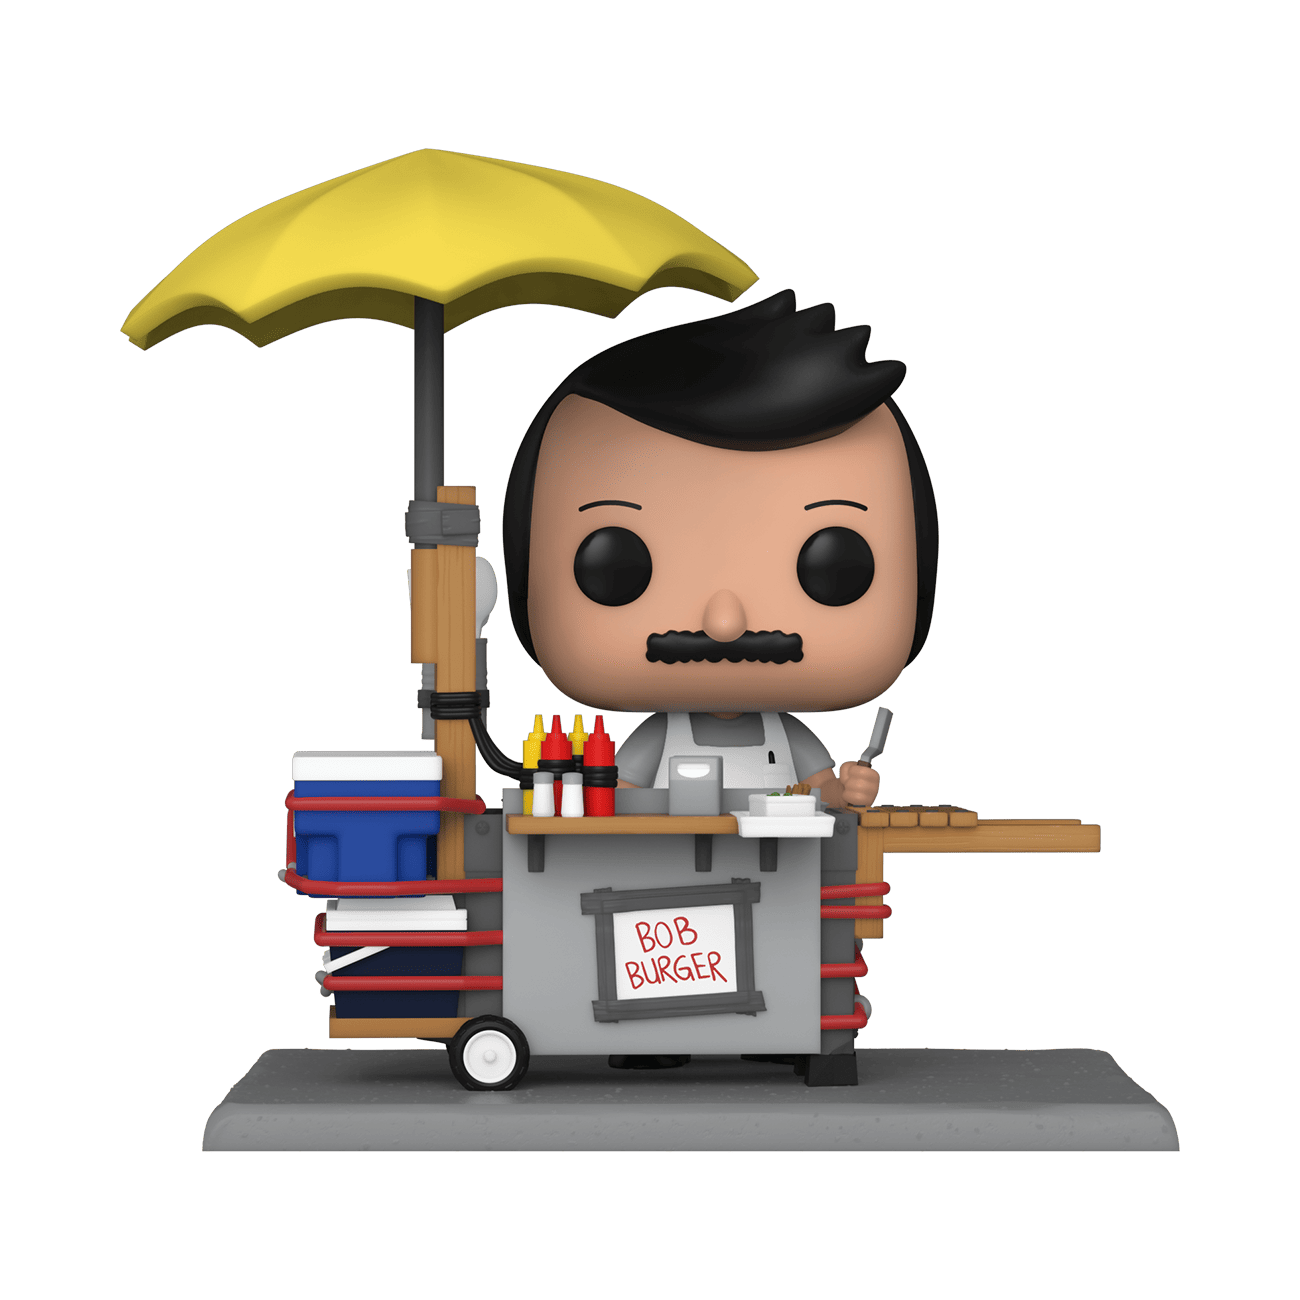 Buy Pop! Deluxe Bob with Burger Cart at Funko.